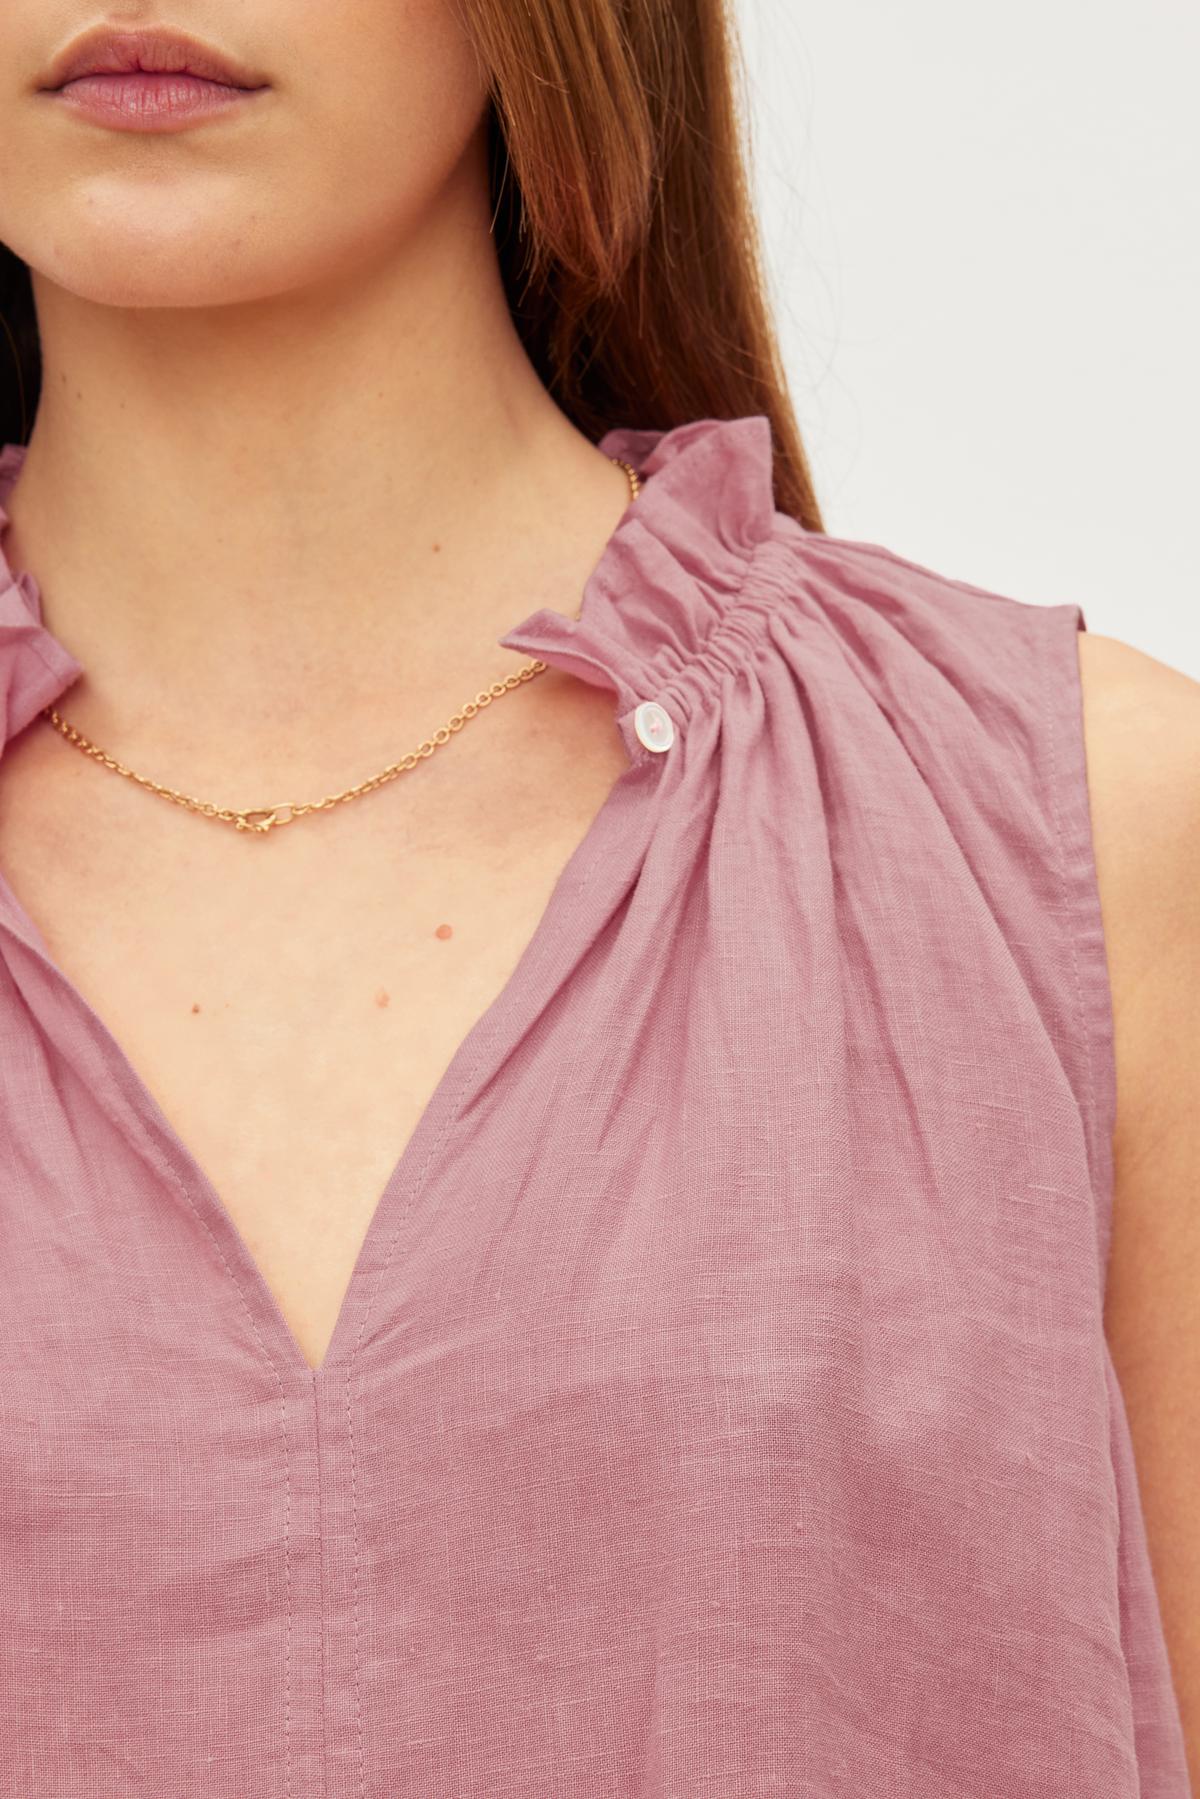 Close-up of a woman wearing a MASIE LINEN TANK TOP from Velvet by Graham & Spencer, with an elastic ruffle neckline and a delicate gold chain necklace with a small pendant.-36571197276353